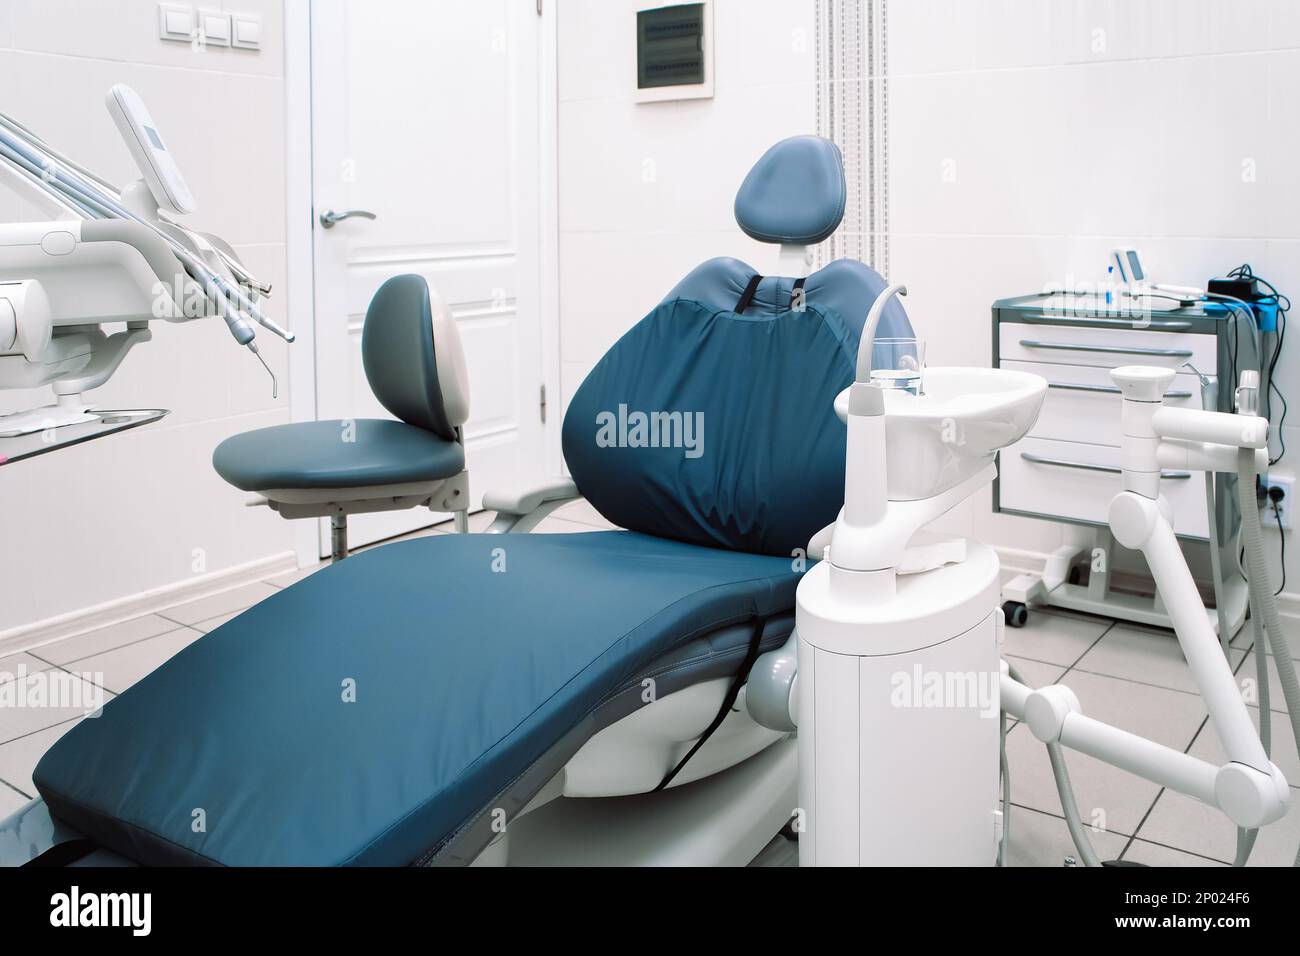 Close-up of modern dental equipment in dentistry clinic. Workplace and tools of dentists. Dental chair and surgical instruments for dental treatment. Stock Photo